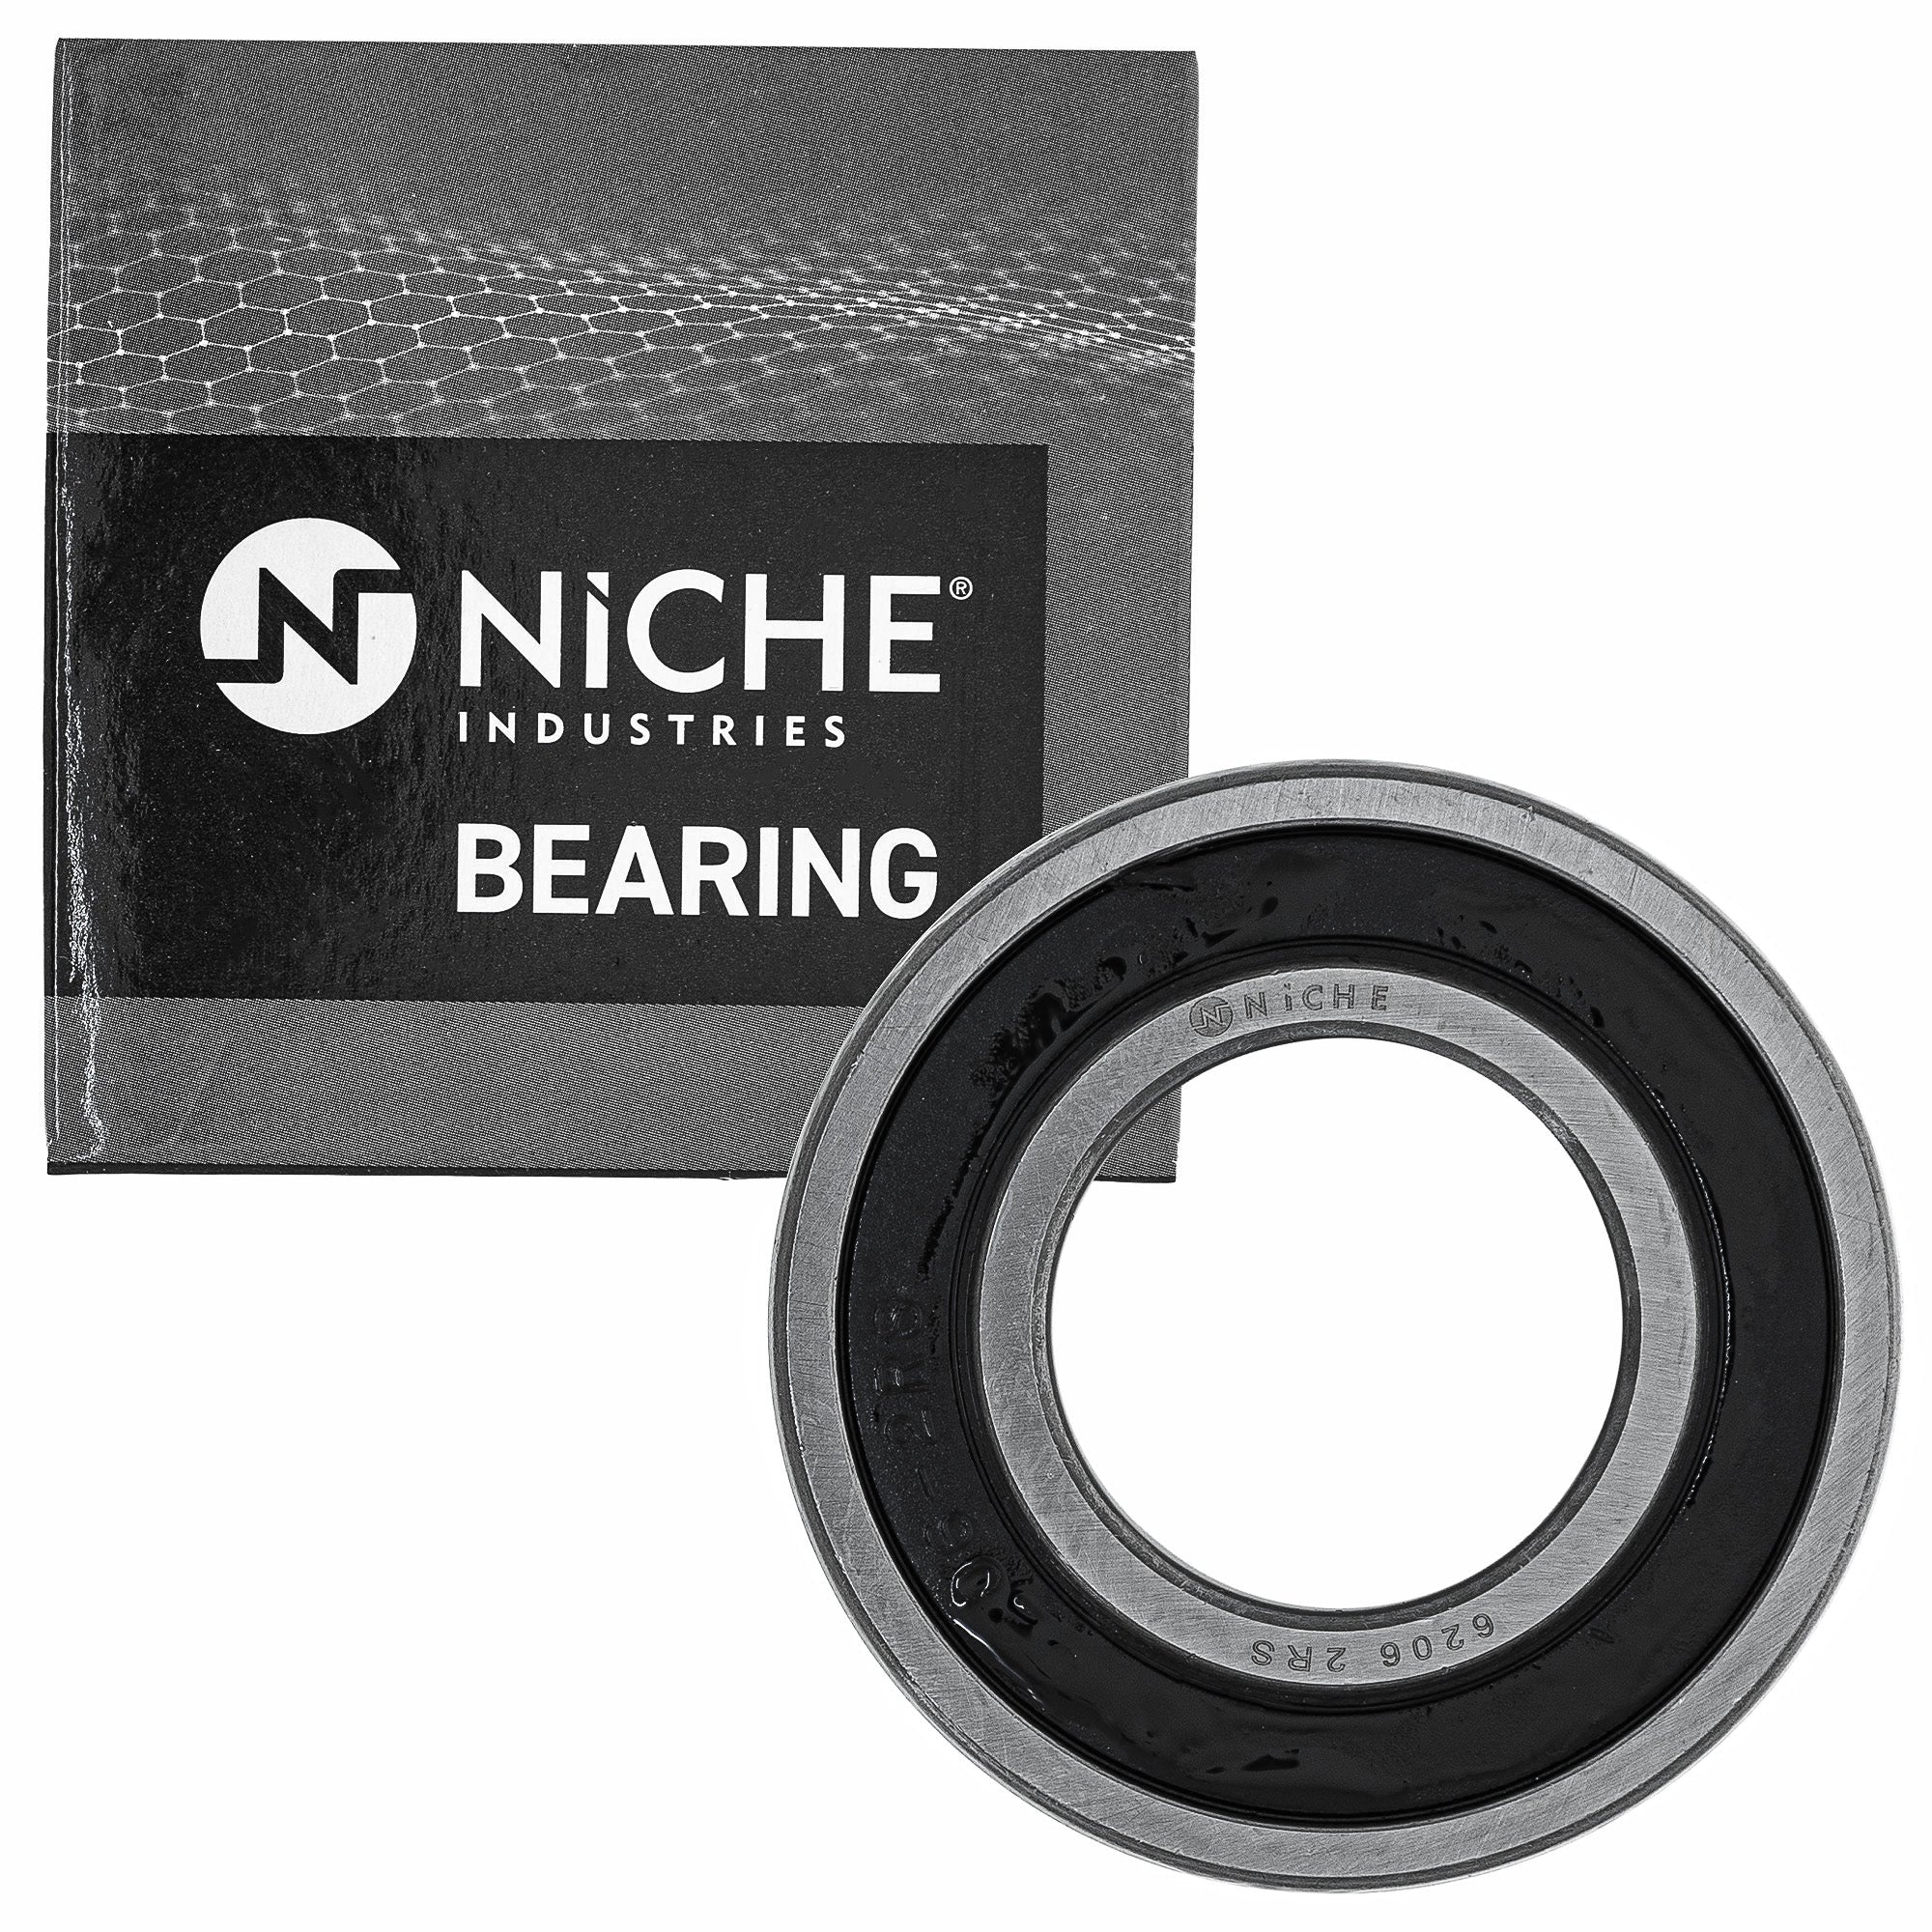 NICHE MK1009147 Wheel Bearing Seal Kit for zOTHER Ref No Xpedition